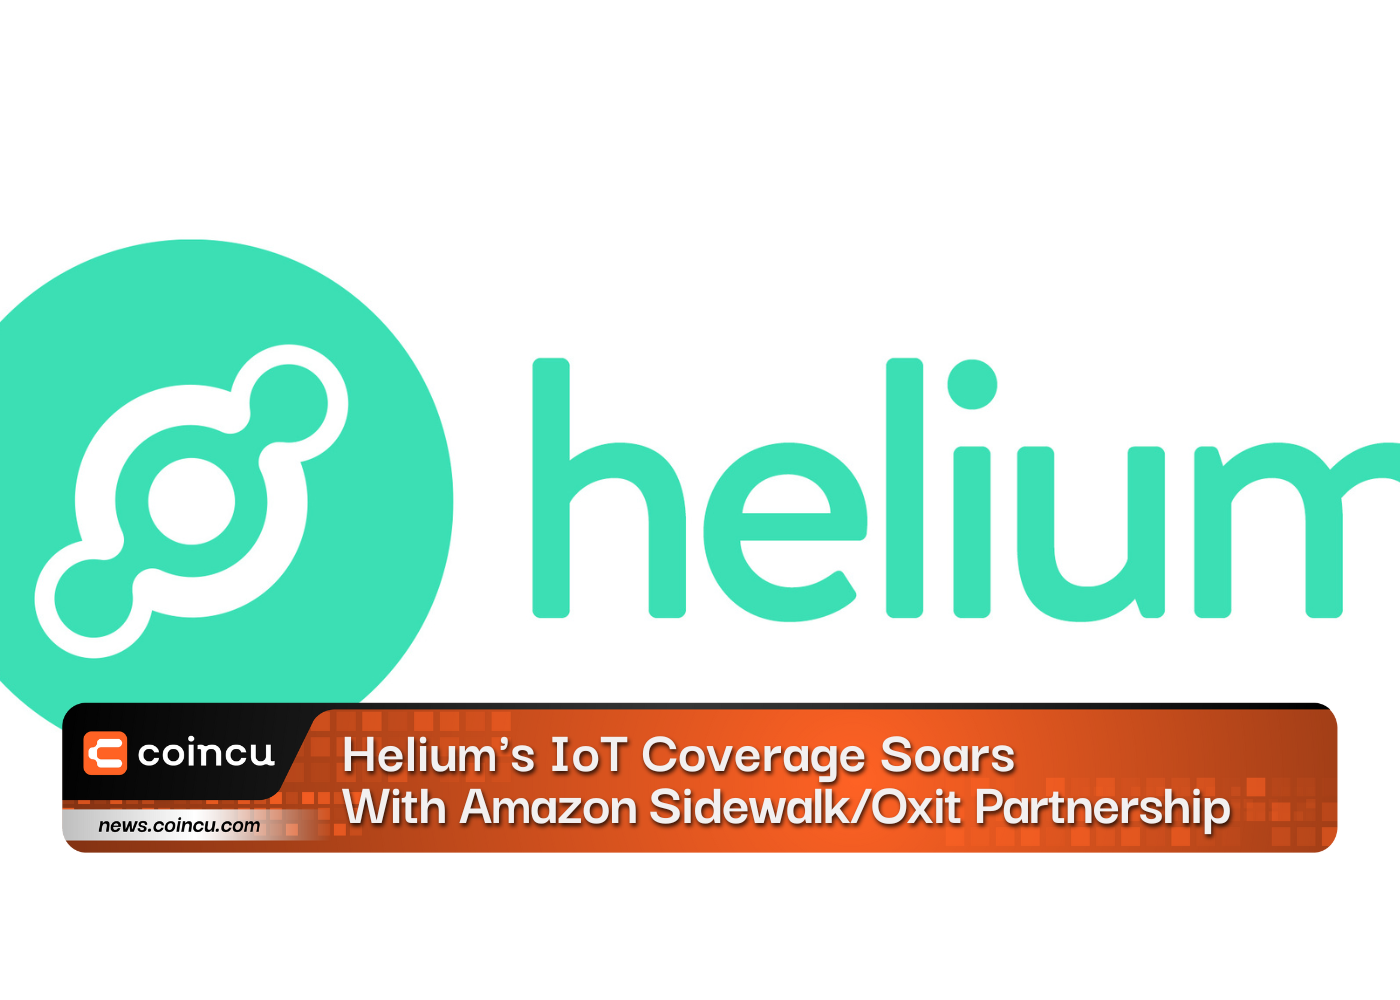 Heliums IoT Coverage Soars 1 1